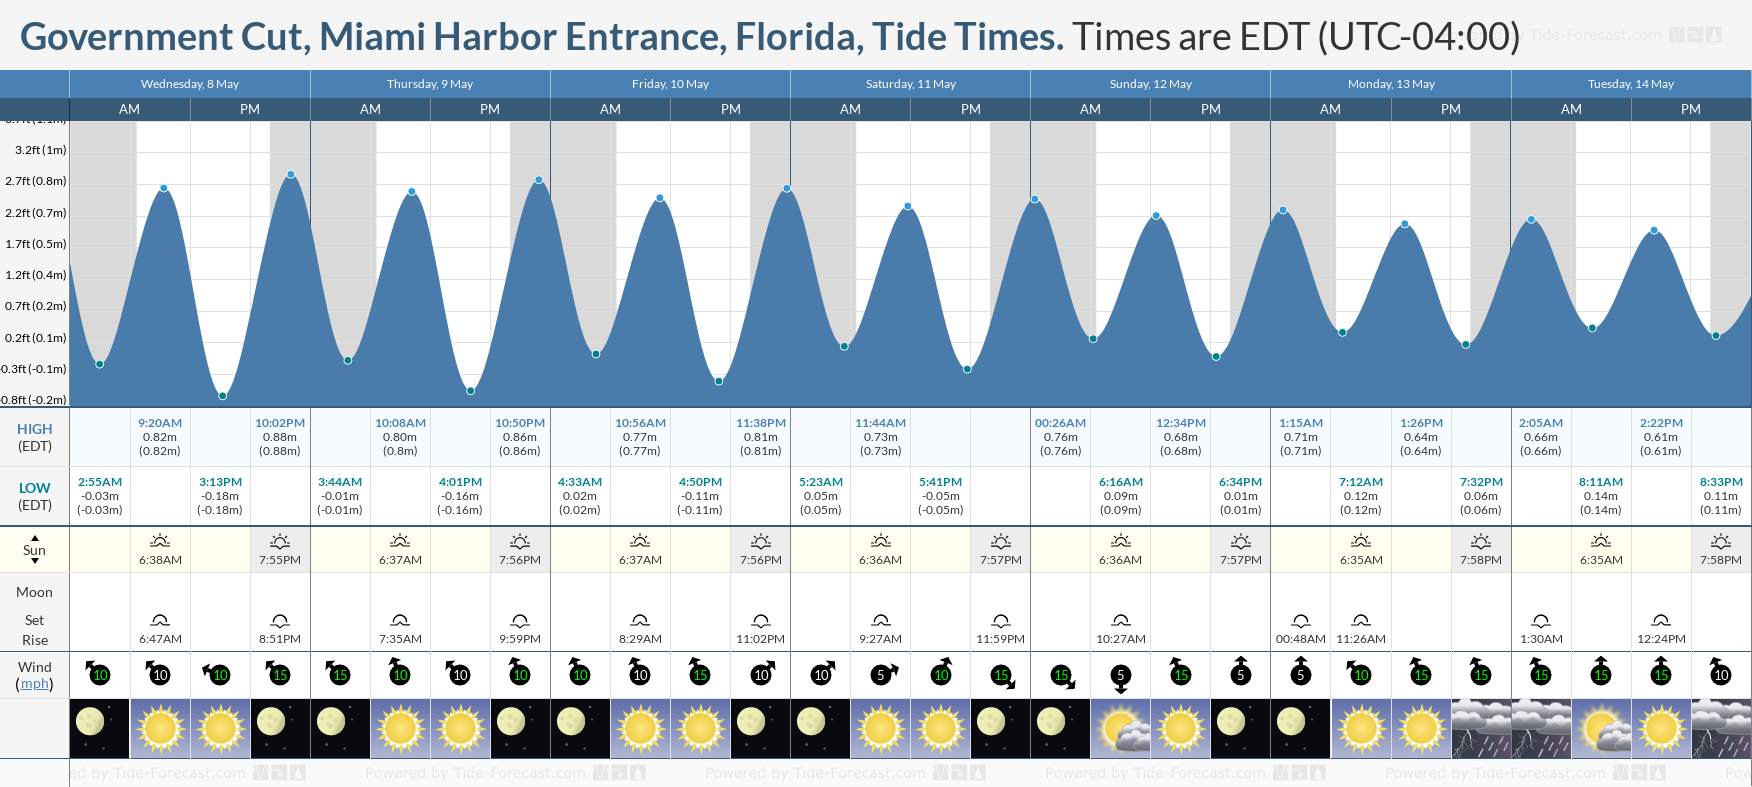 Government Cut, Miami Harbor Entrance, Florida Tide Chart including high and low tide times for the next 7 days